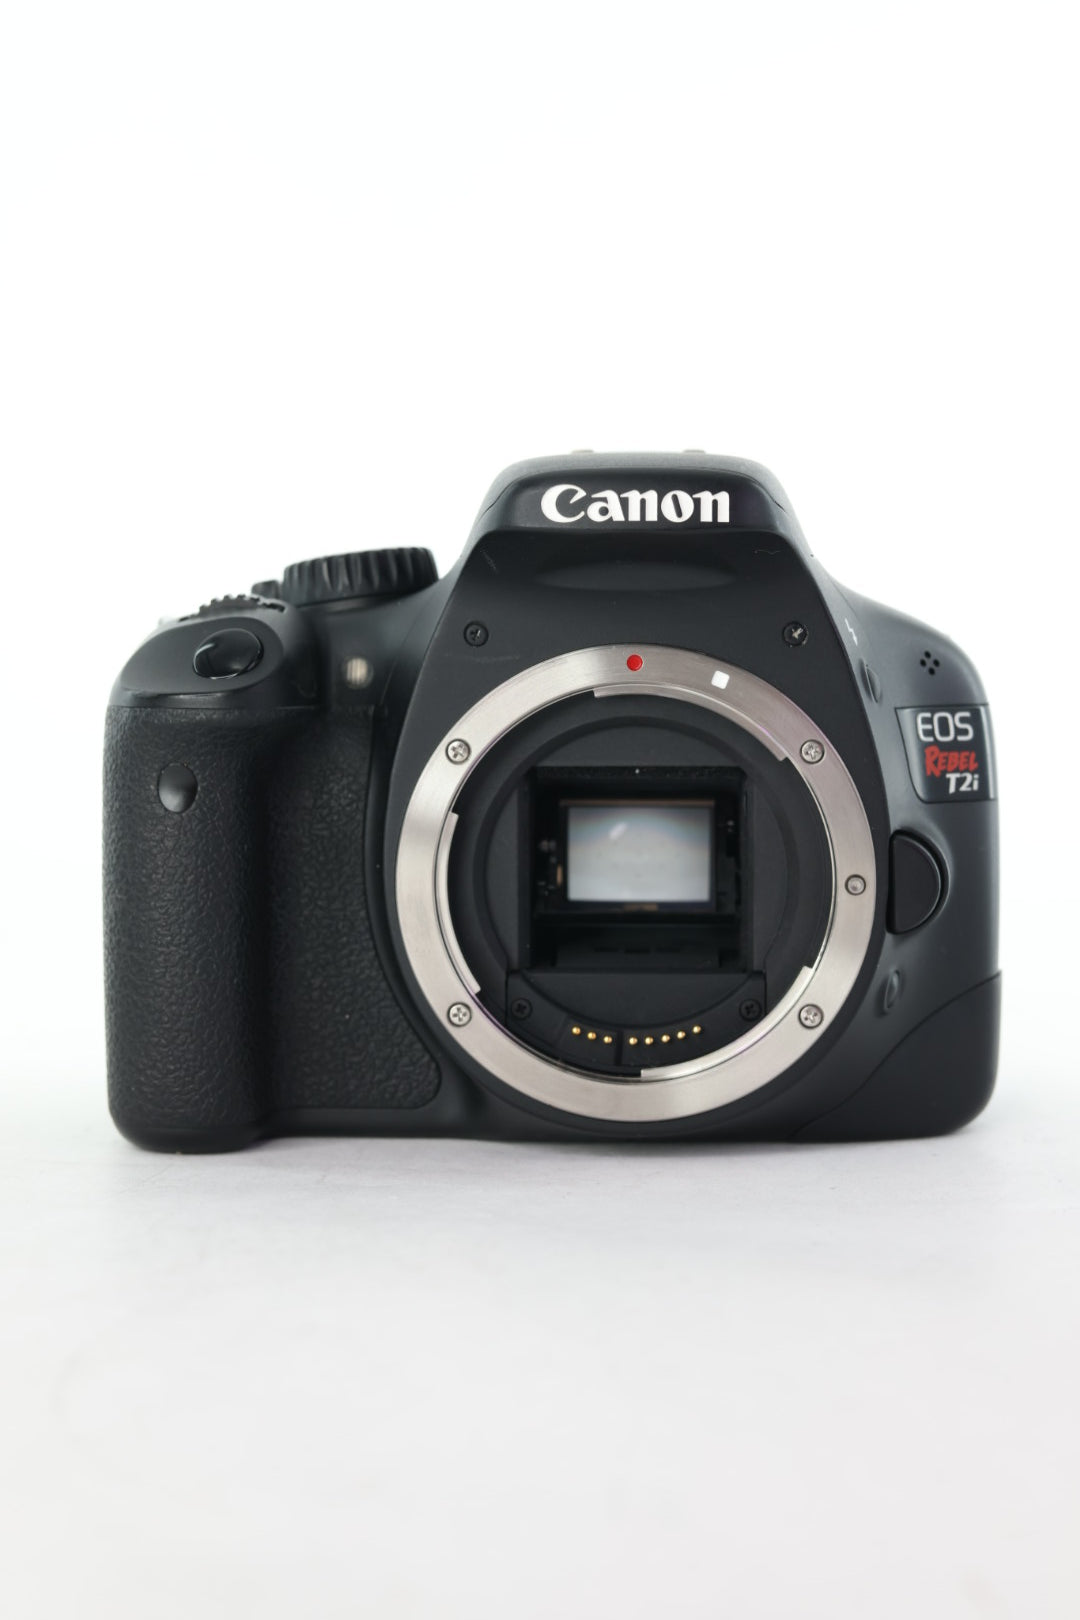 Canon EOSREBELT2I/23841 EOS Rebel T2i, Body Only, Used (For Parts Only)